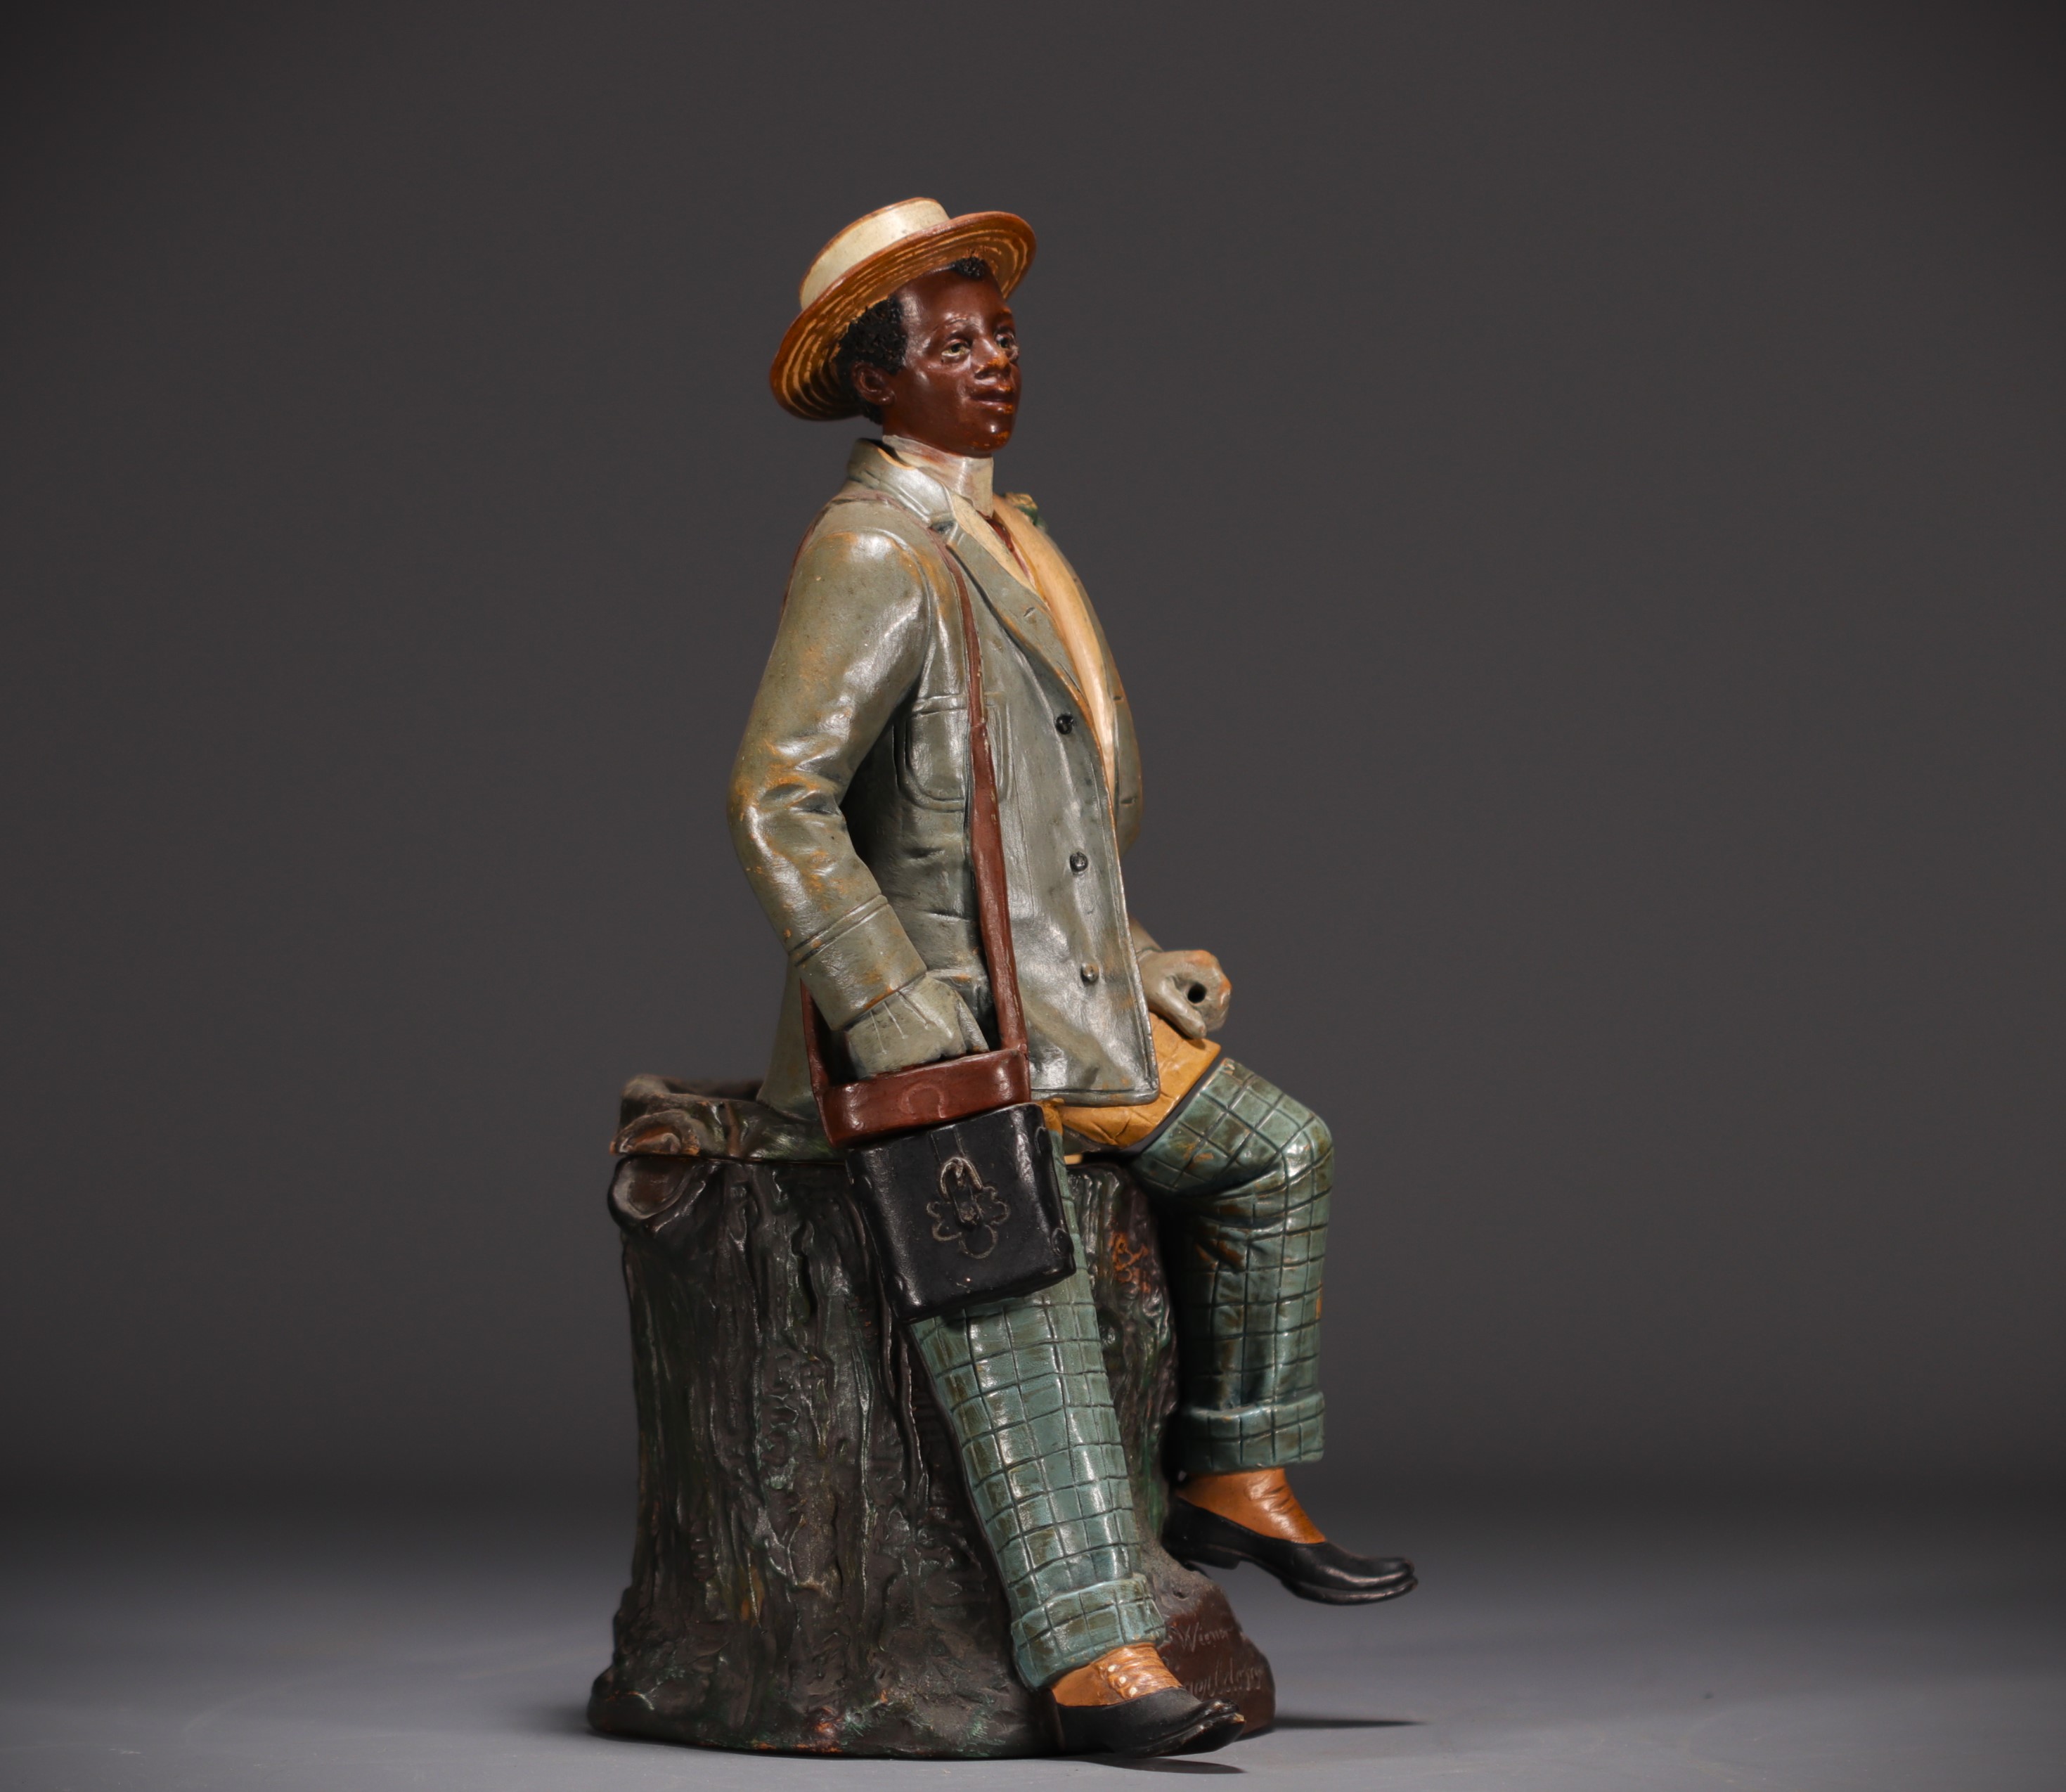 Bernard BLOCH (1836-1909) "African dandy with monocle" Polychrome terracotta tobacco pot. - Image 2 of 5